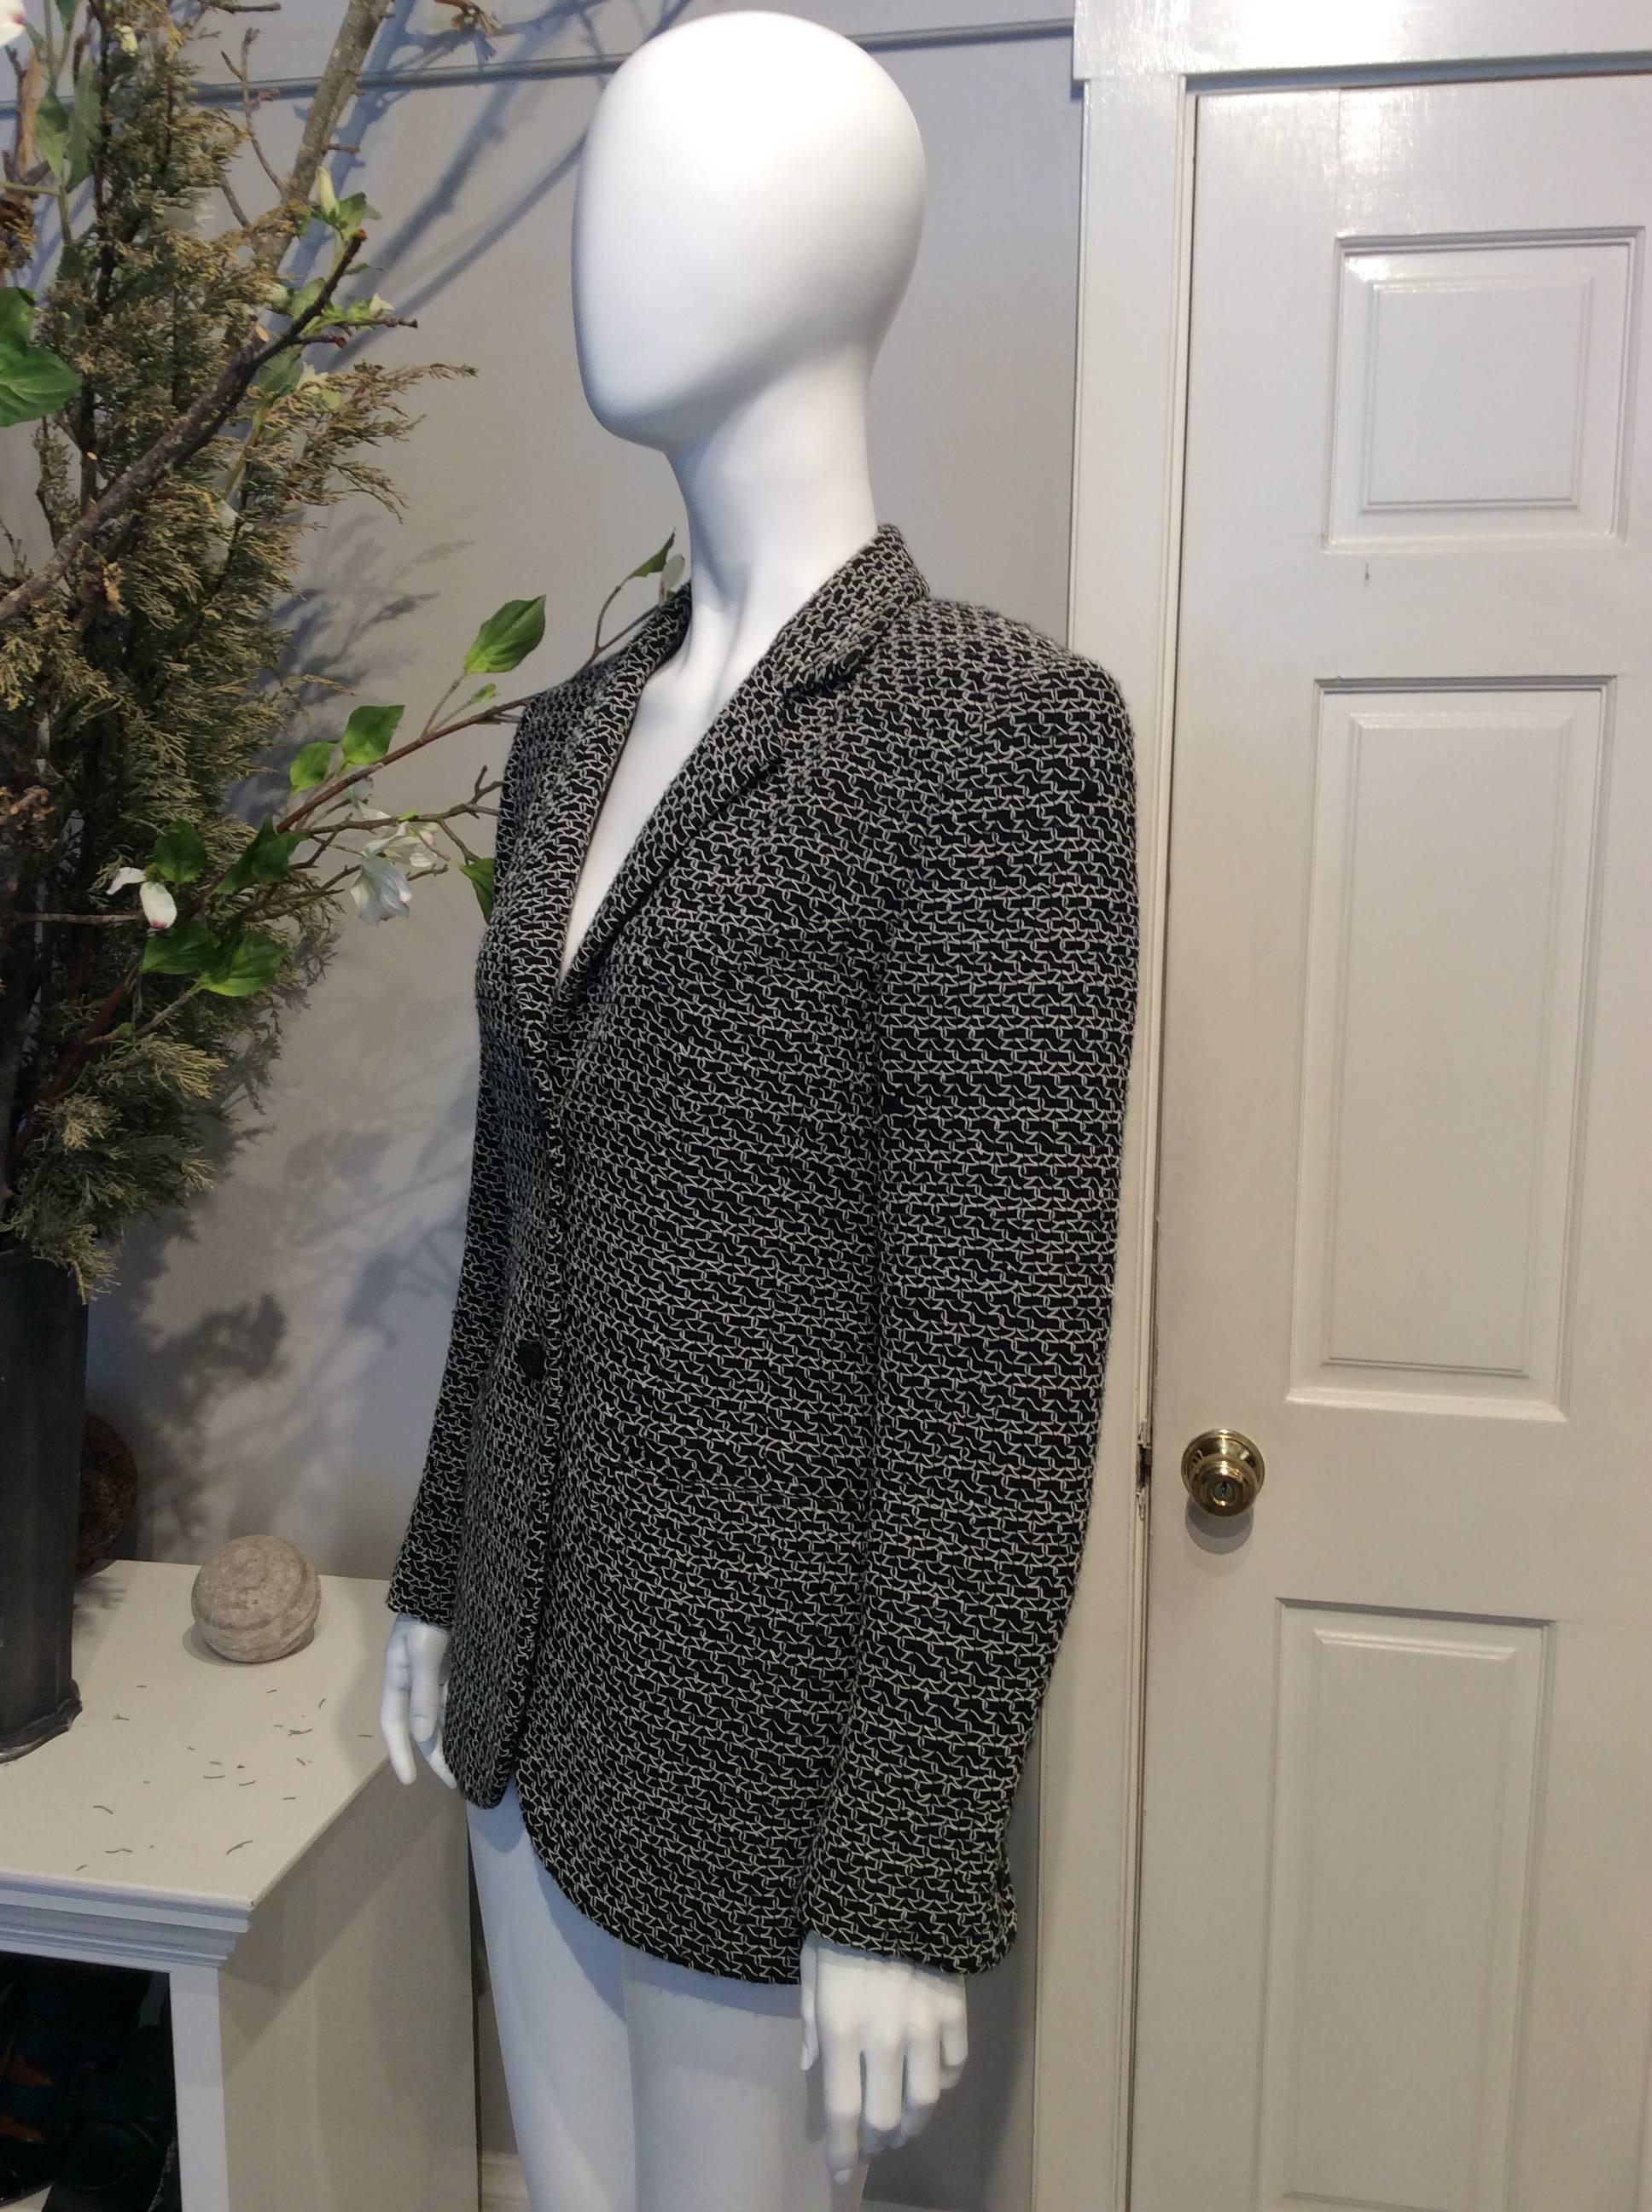 Chanel Black and White Woven Tweed Jacket with Black Buttons   In Excellent Condition For Sale In San Francisco, CA